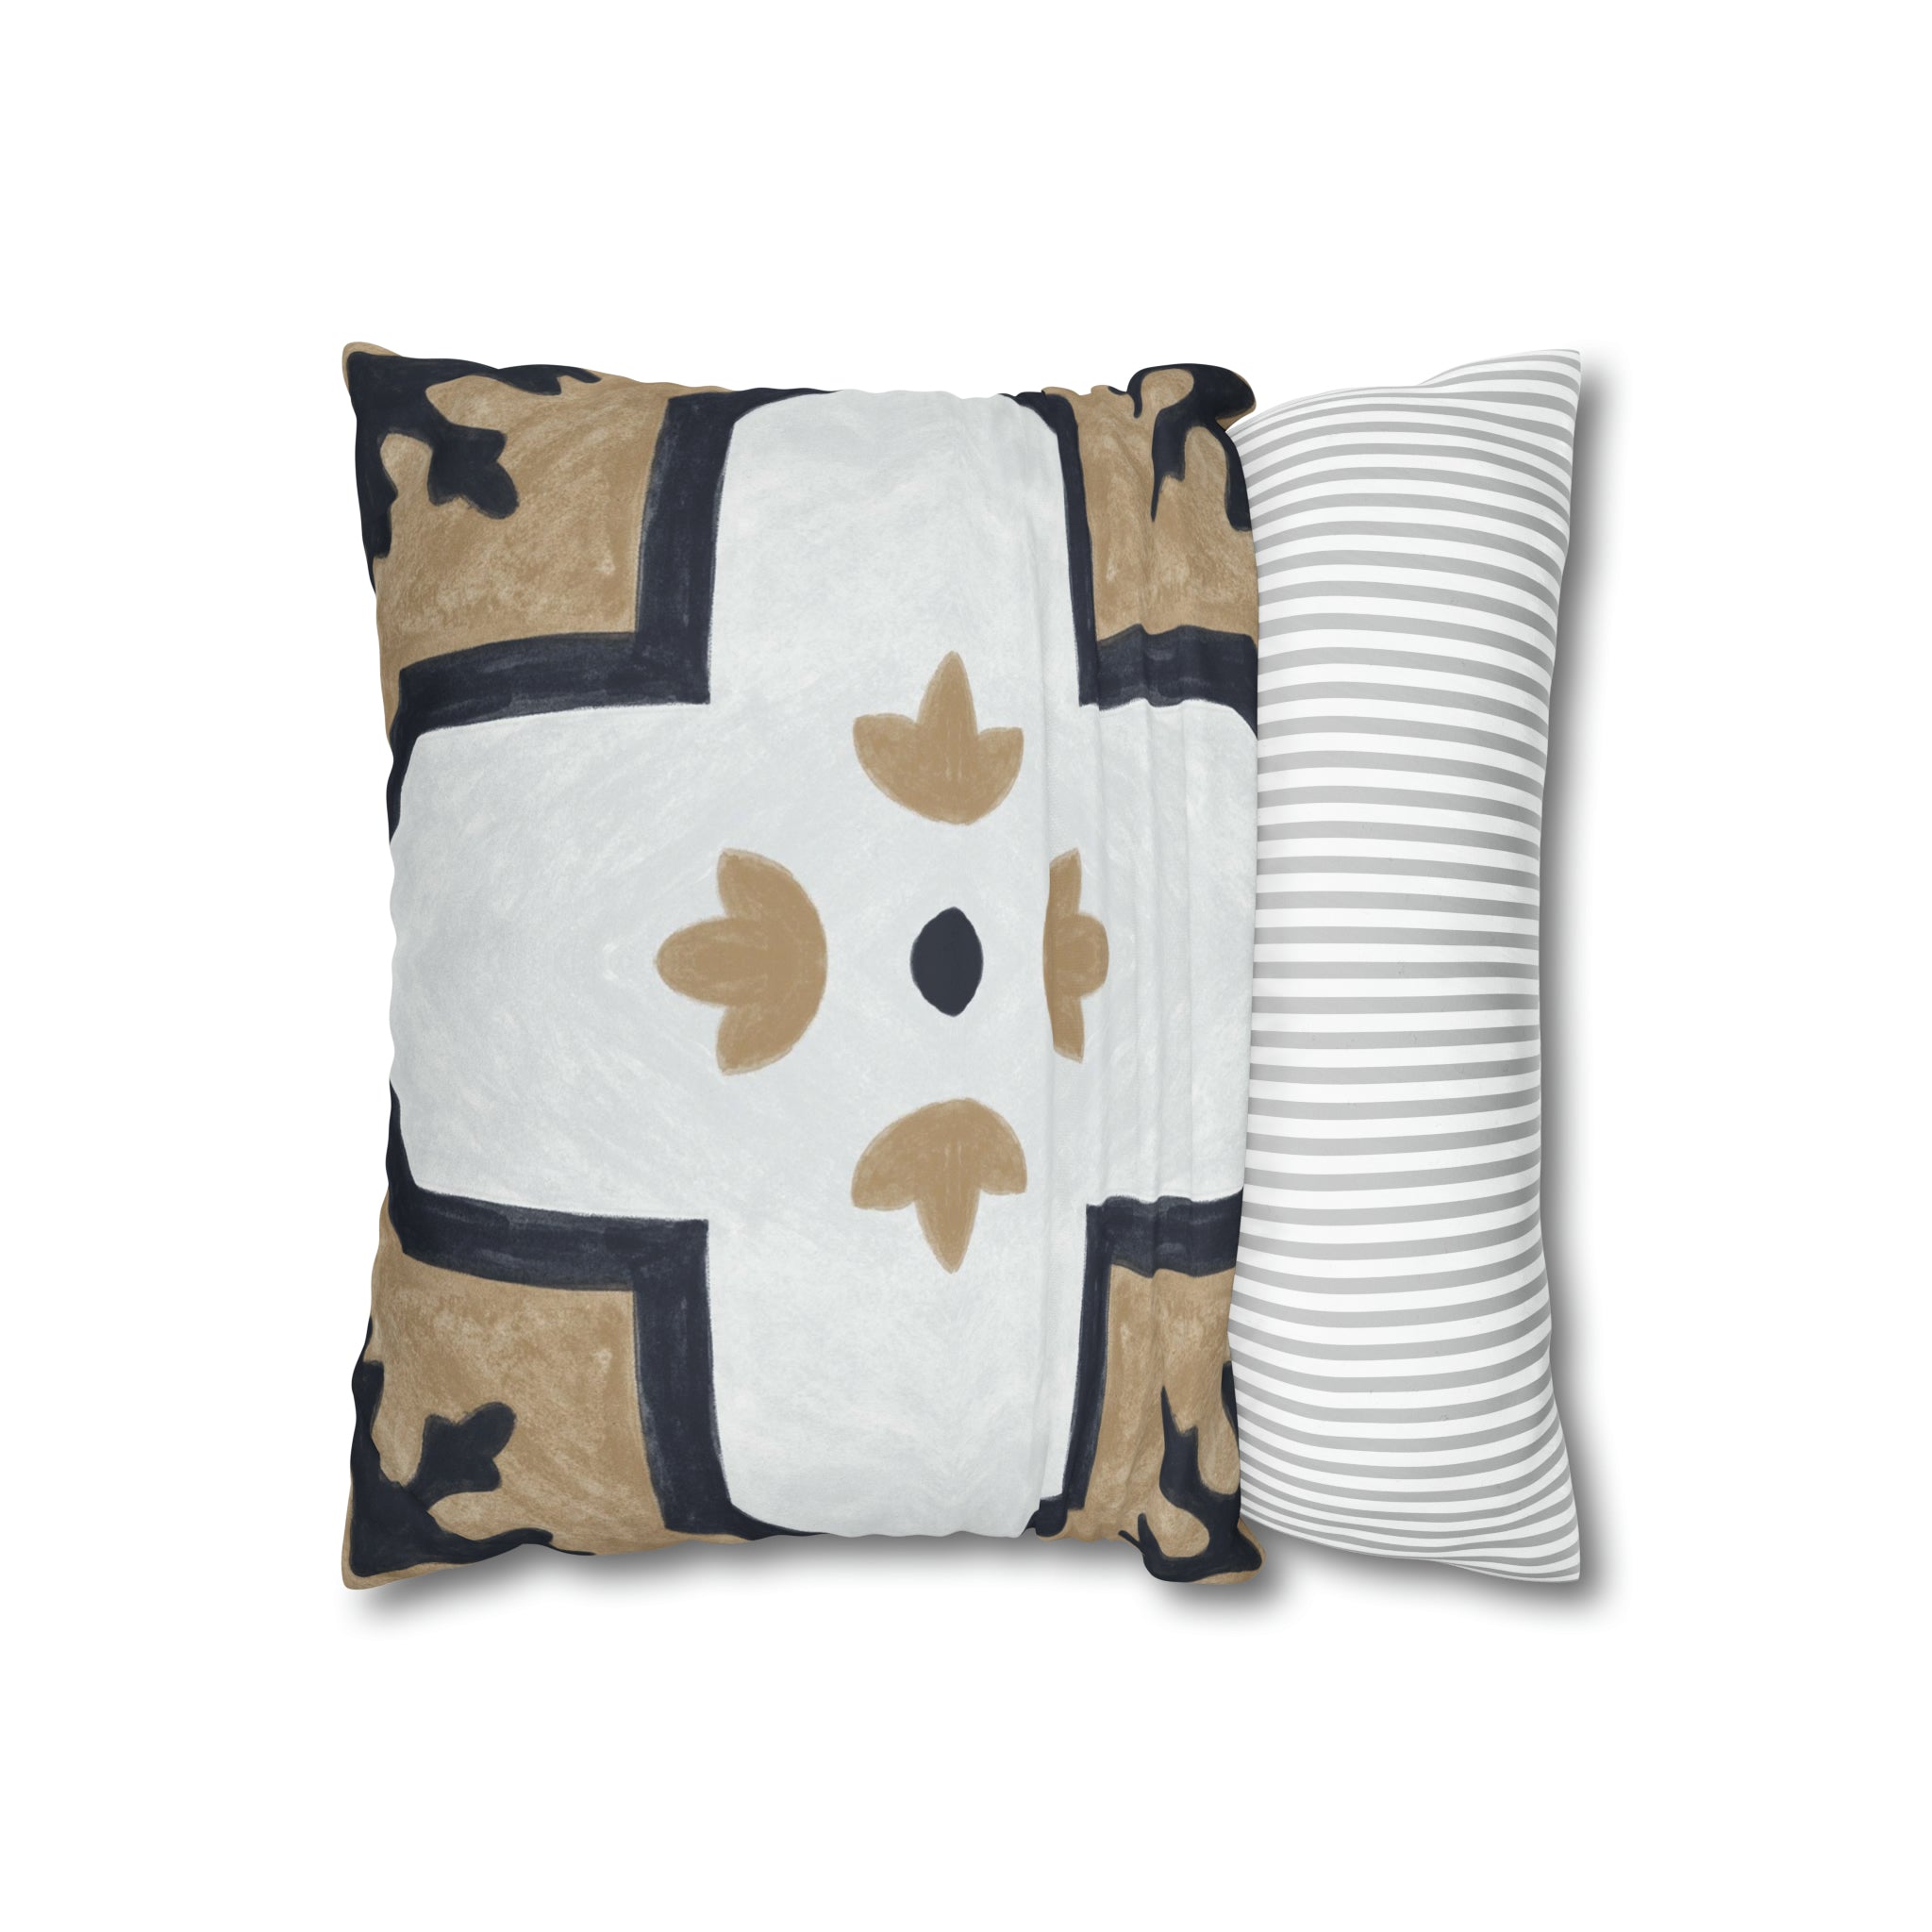 a decorative pillow with a cross on it